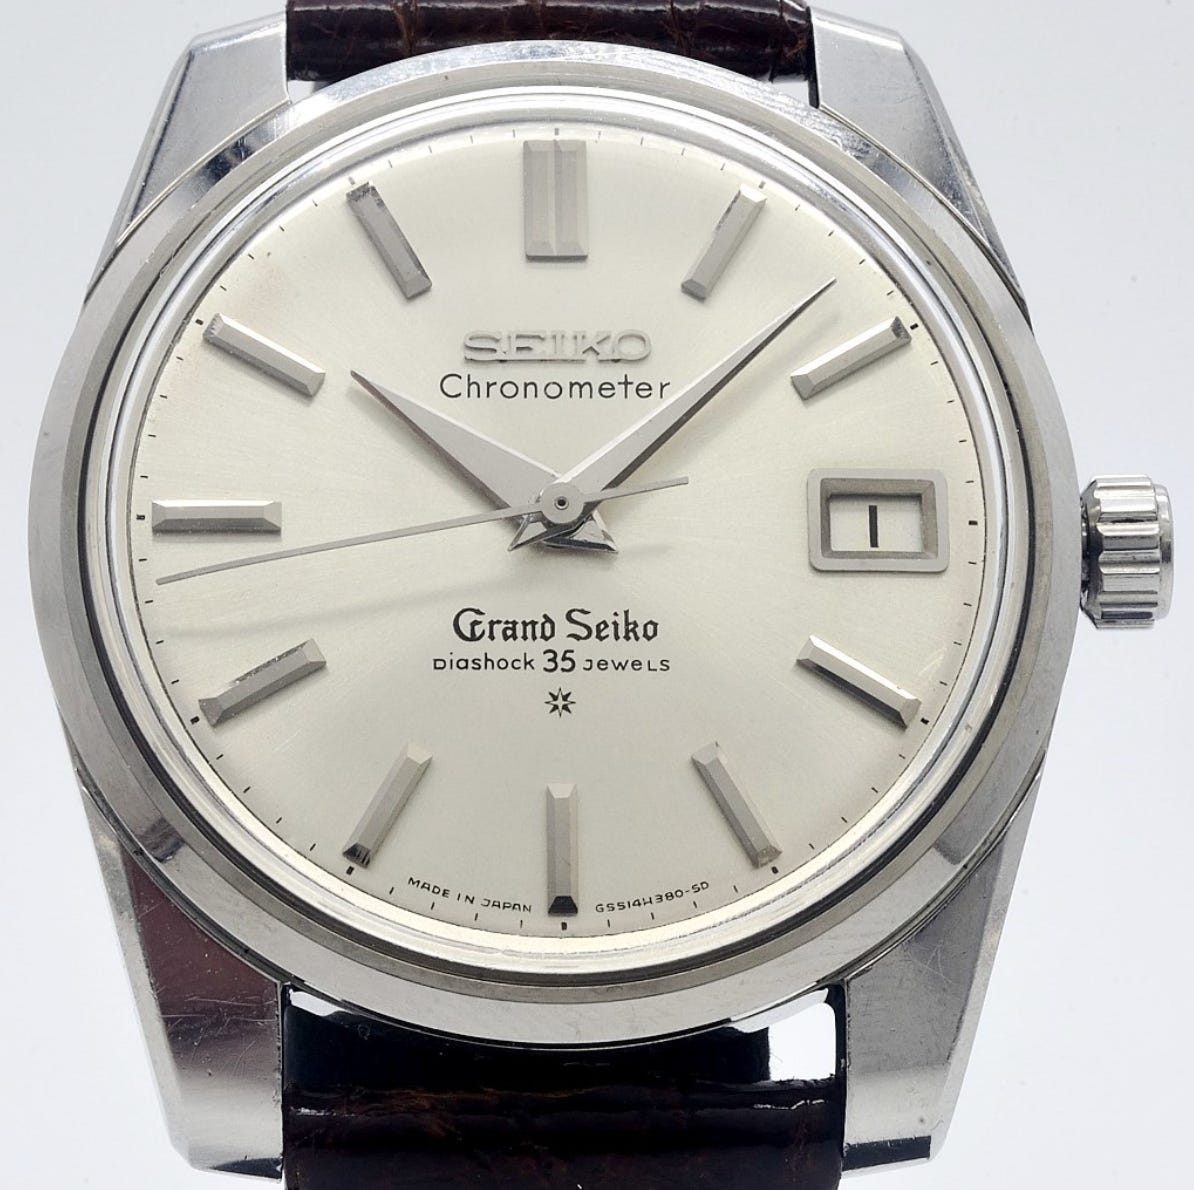 Holiday horological horrors - the Grand Seiko guy